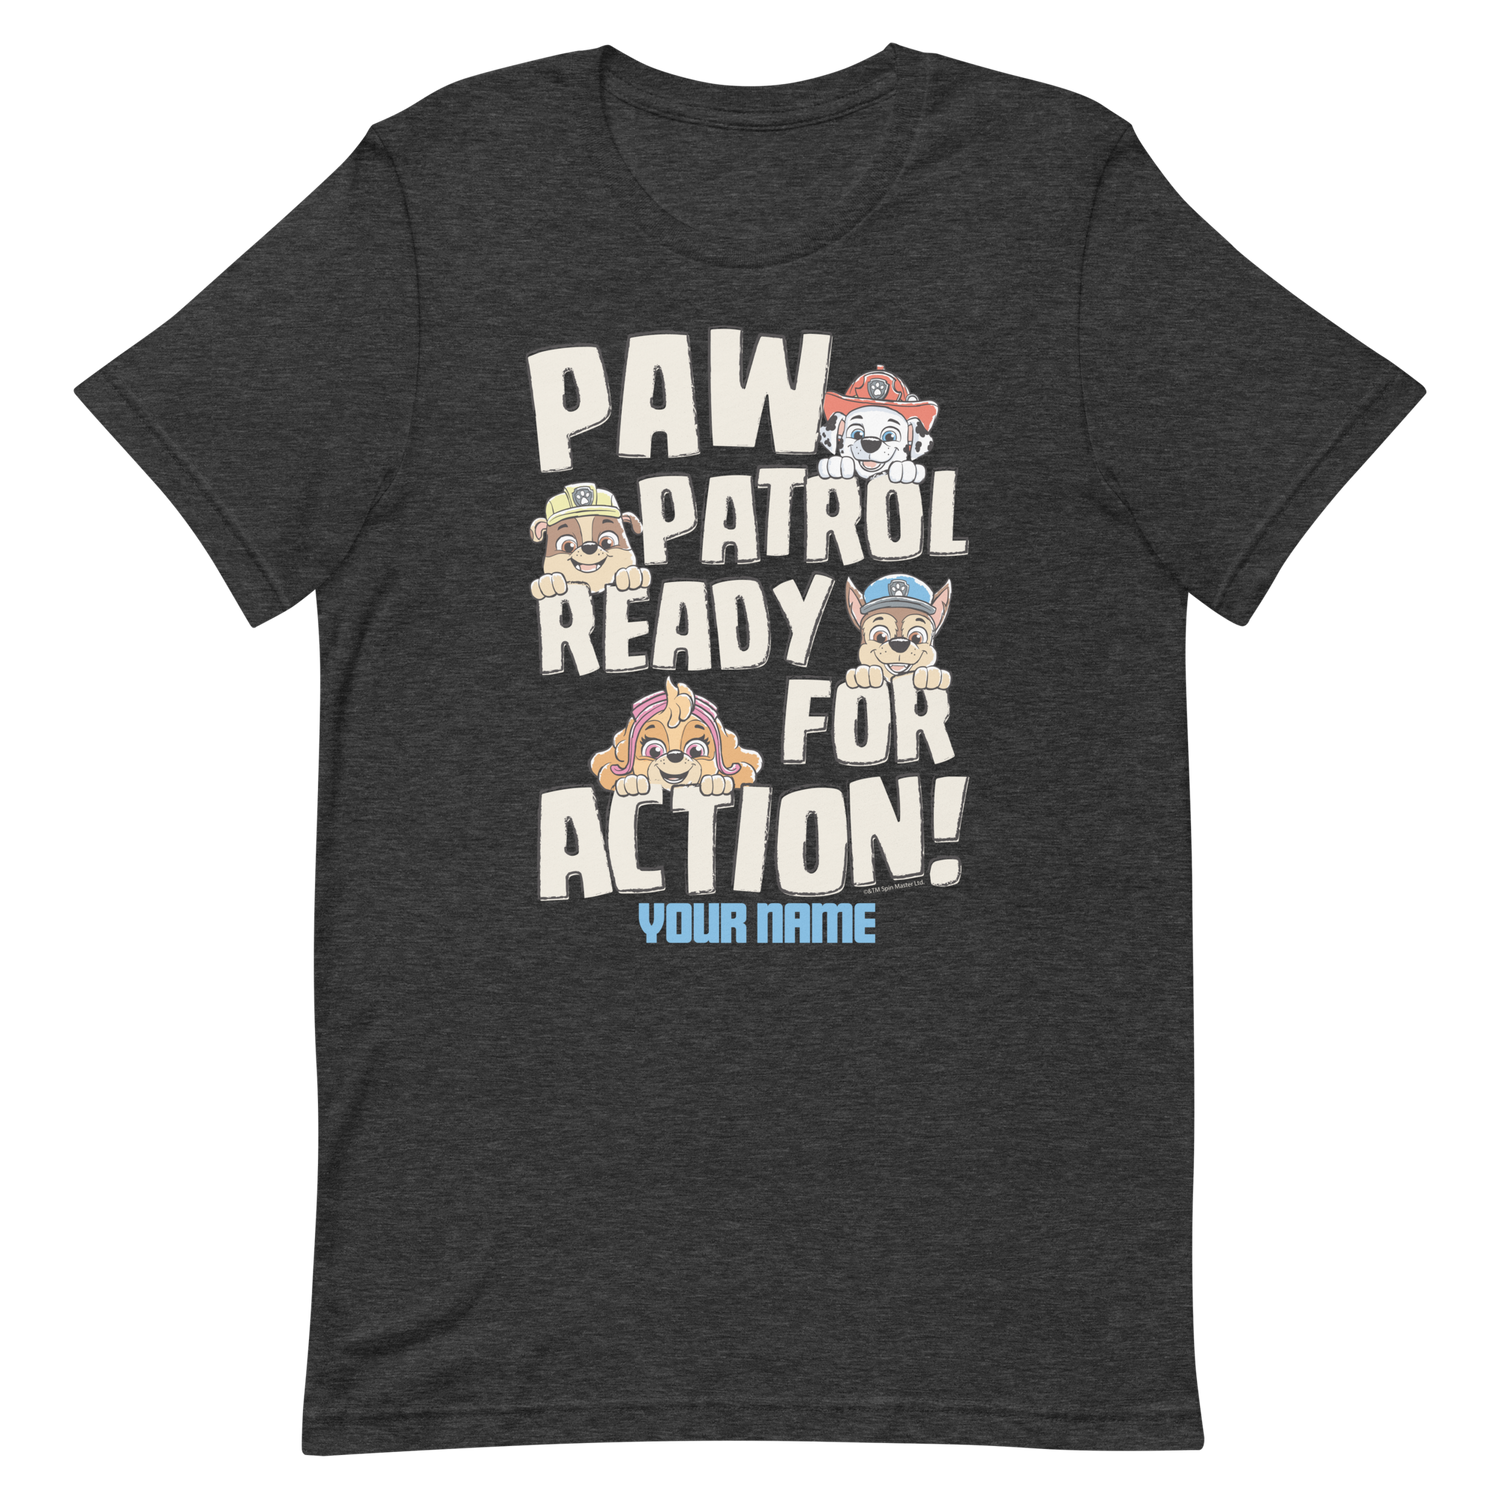 Adult Shop Short Patrol PAW Ready – For Personalized T-Shirt Paramount Action Sleeve